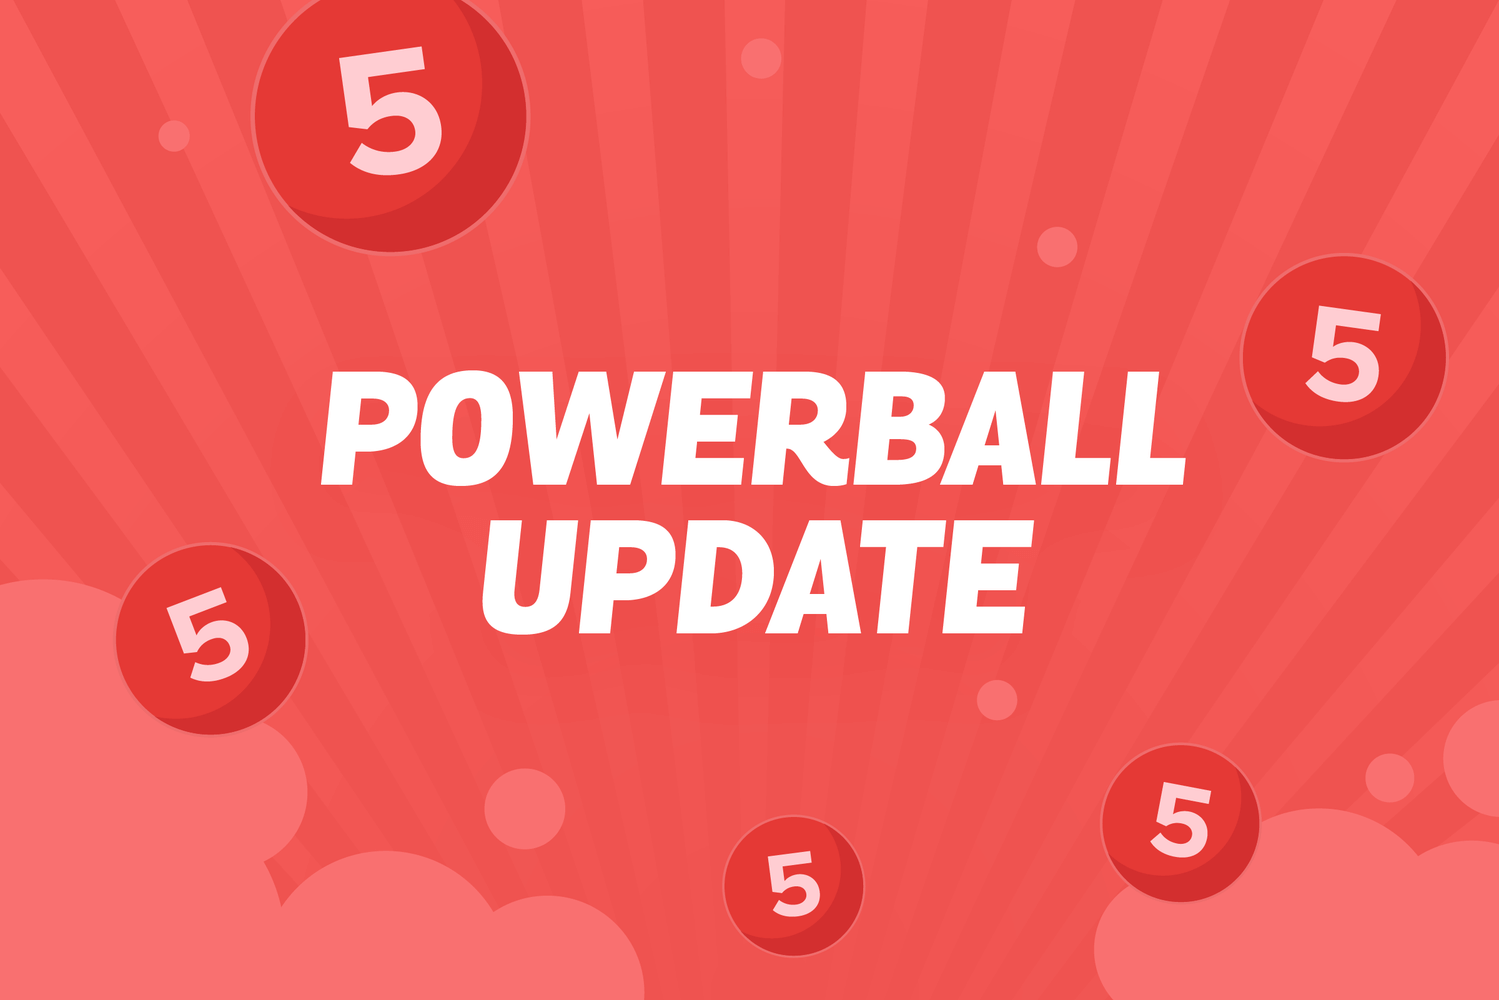 Powerball changes